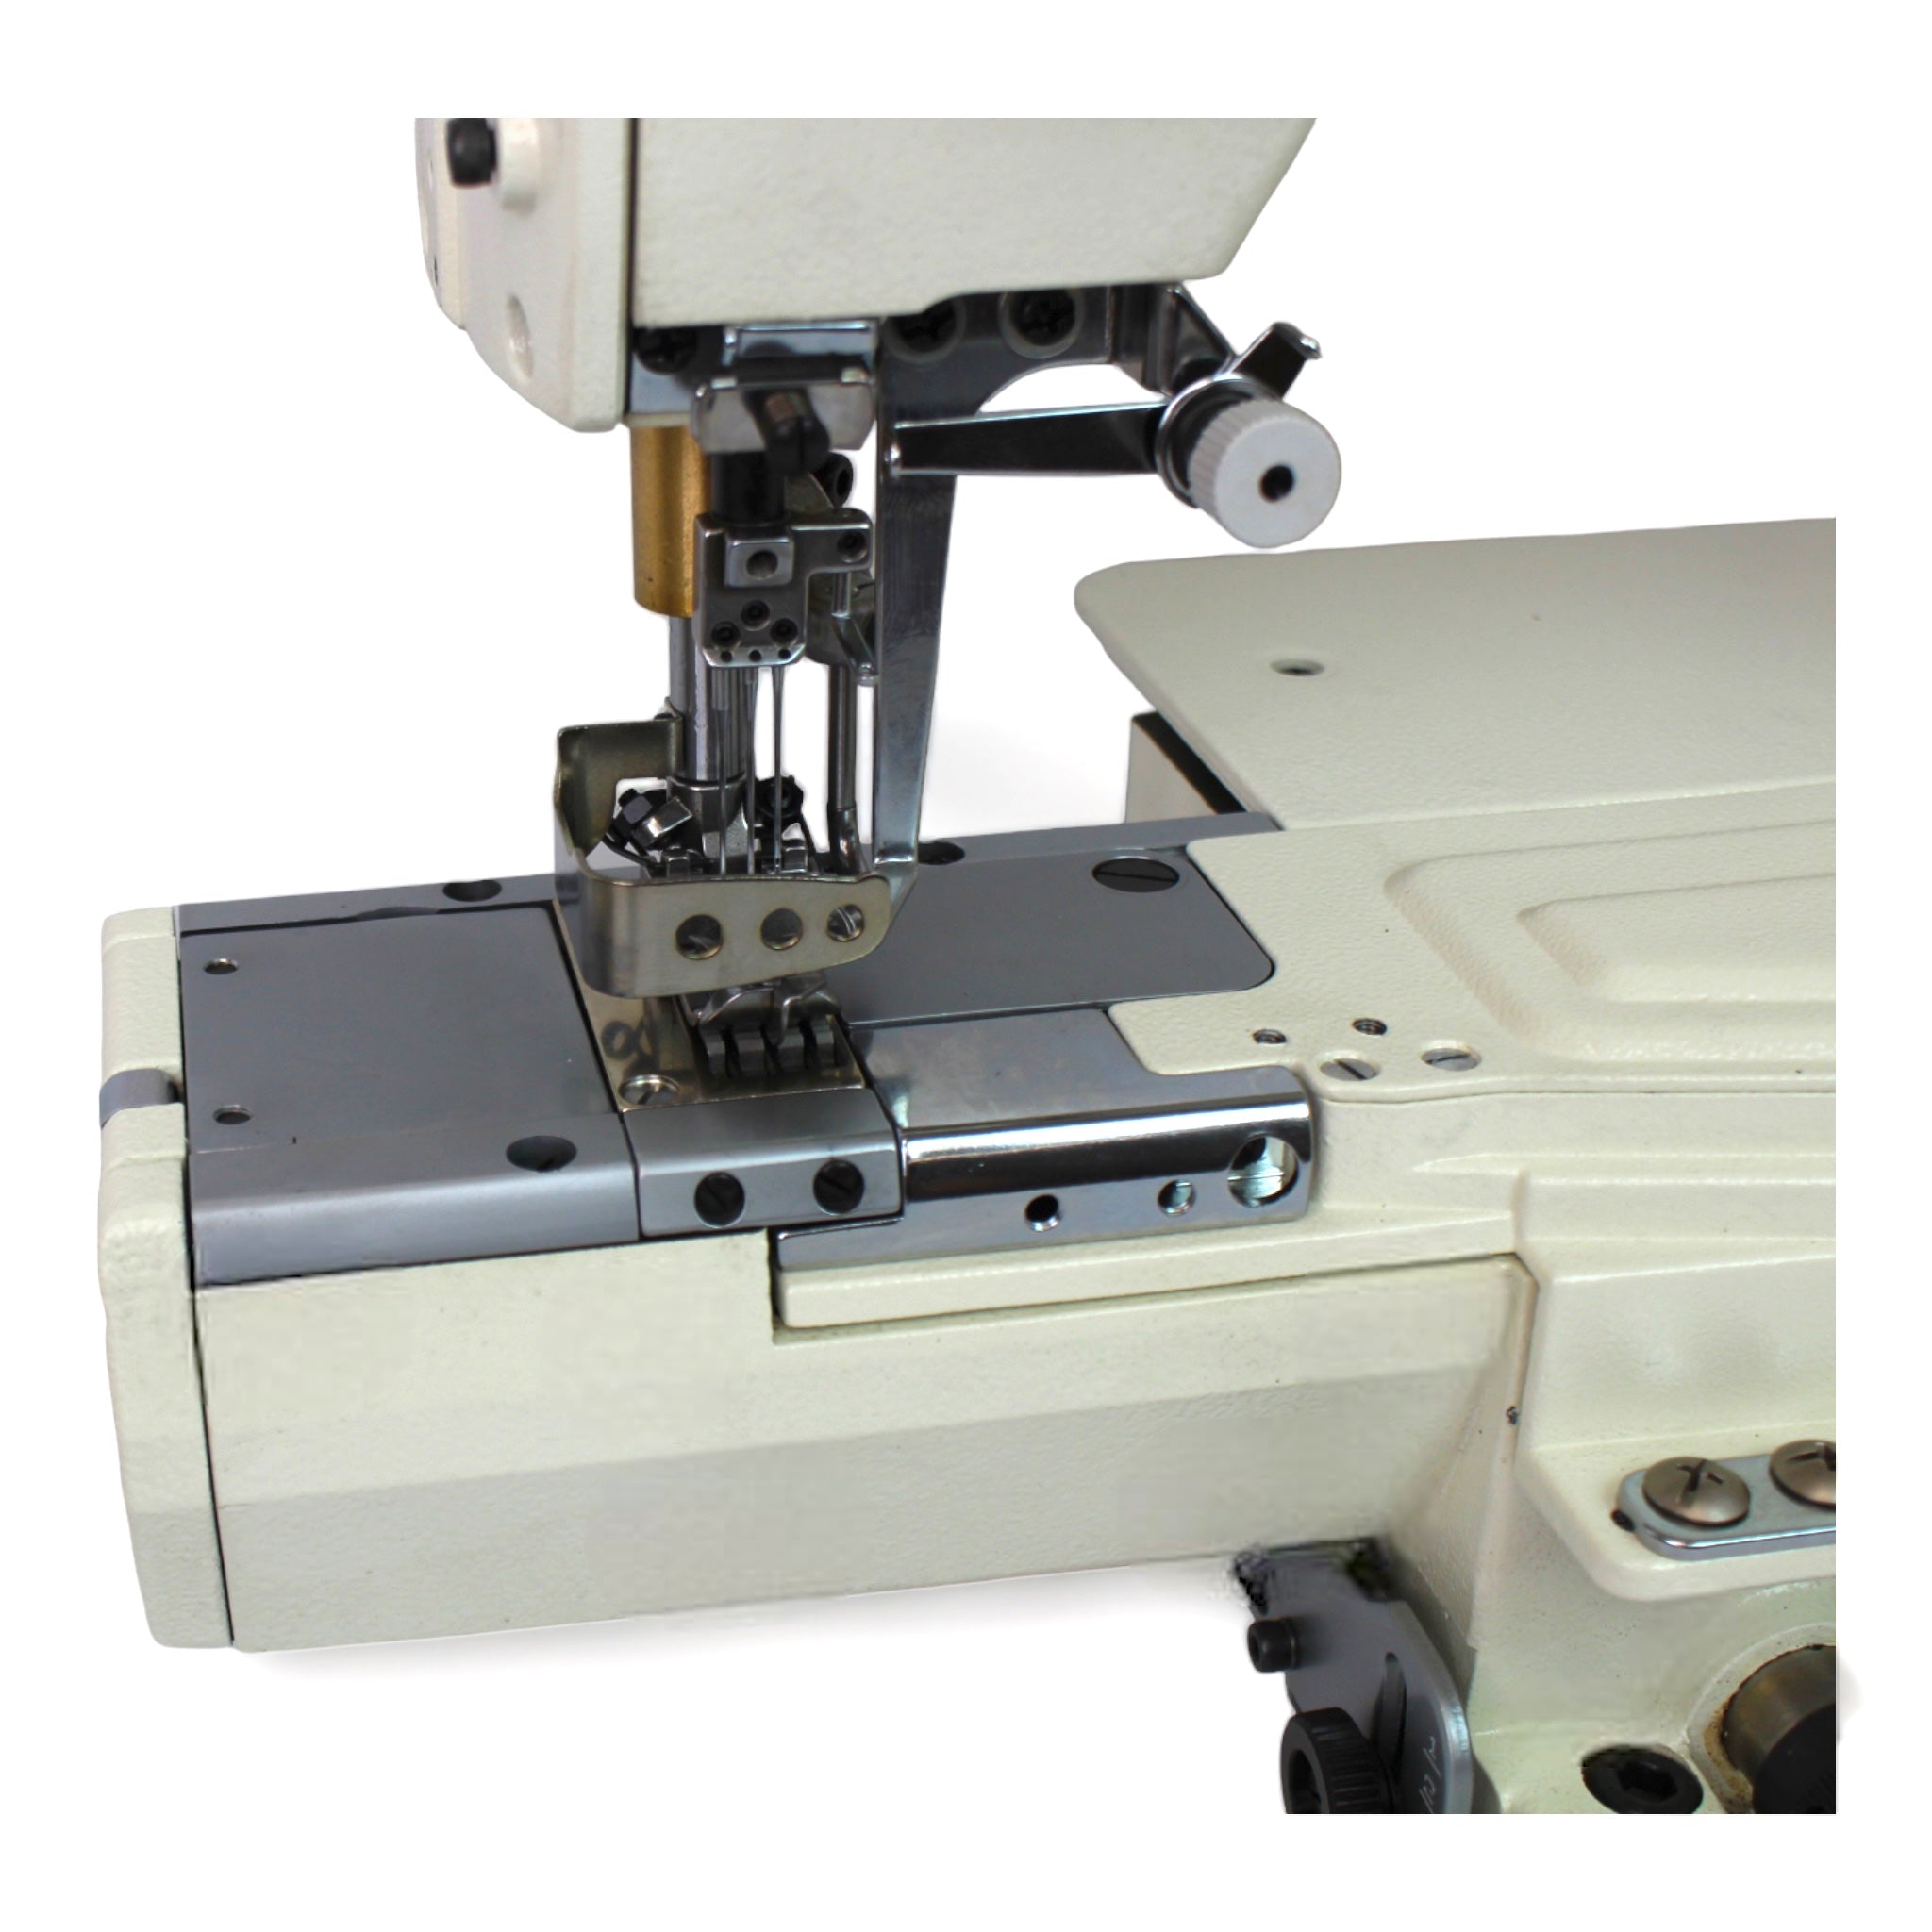 KANSAI SPECIAL NR-9803GMG 1/4 3 Needle Cylinderbed Coverstitch Industrial Sewing Machine Assembled with Servo Motor, Fully Submerged Table Setup Included